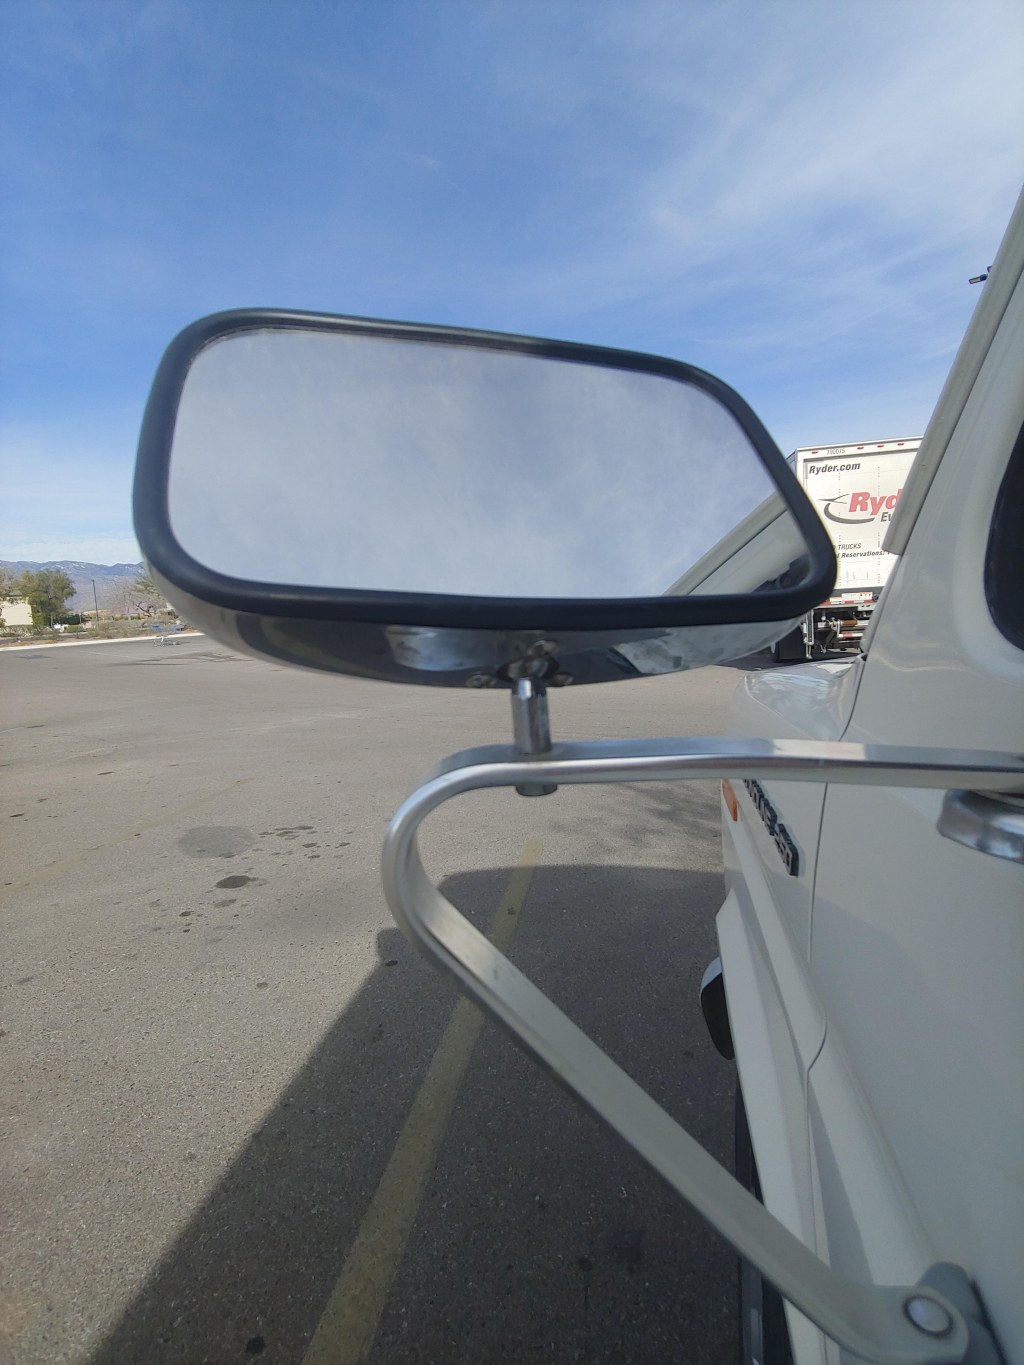 Picture of: Driver side mirror keeps getting pushed down by wind pressure at